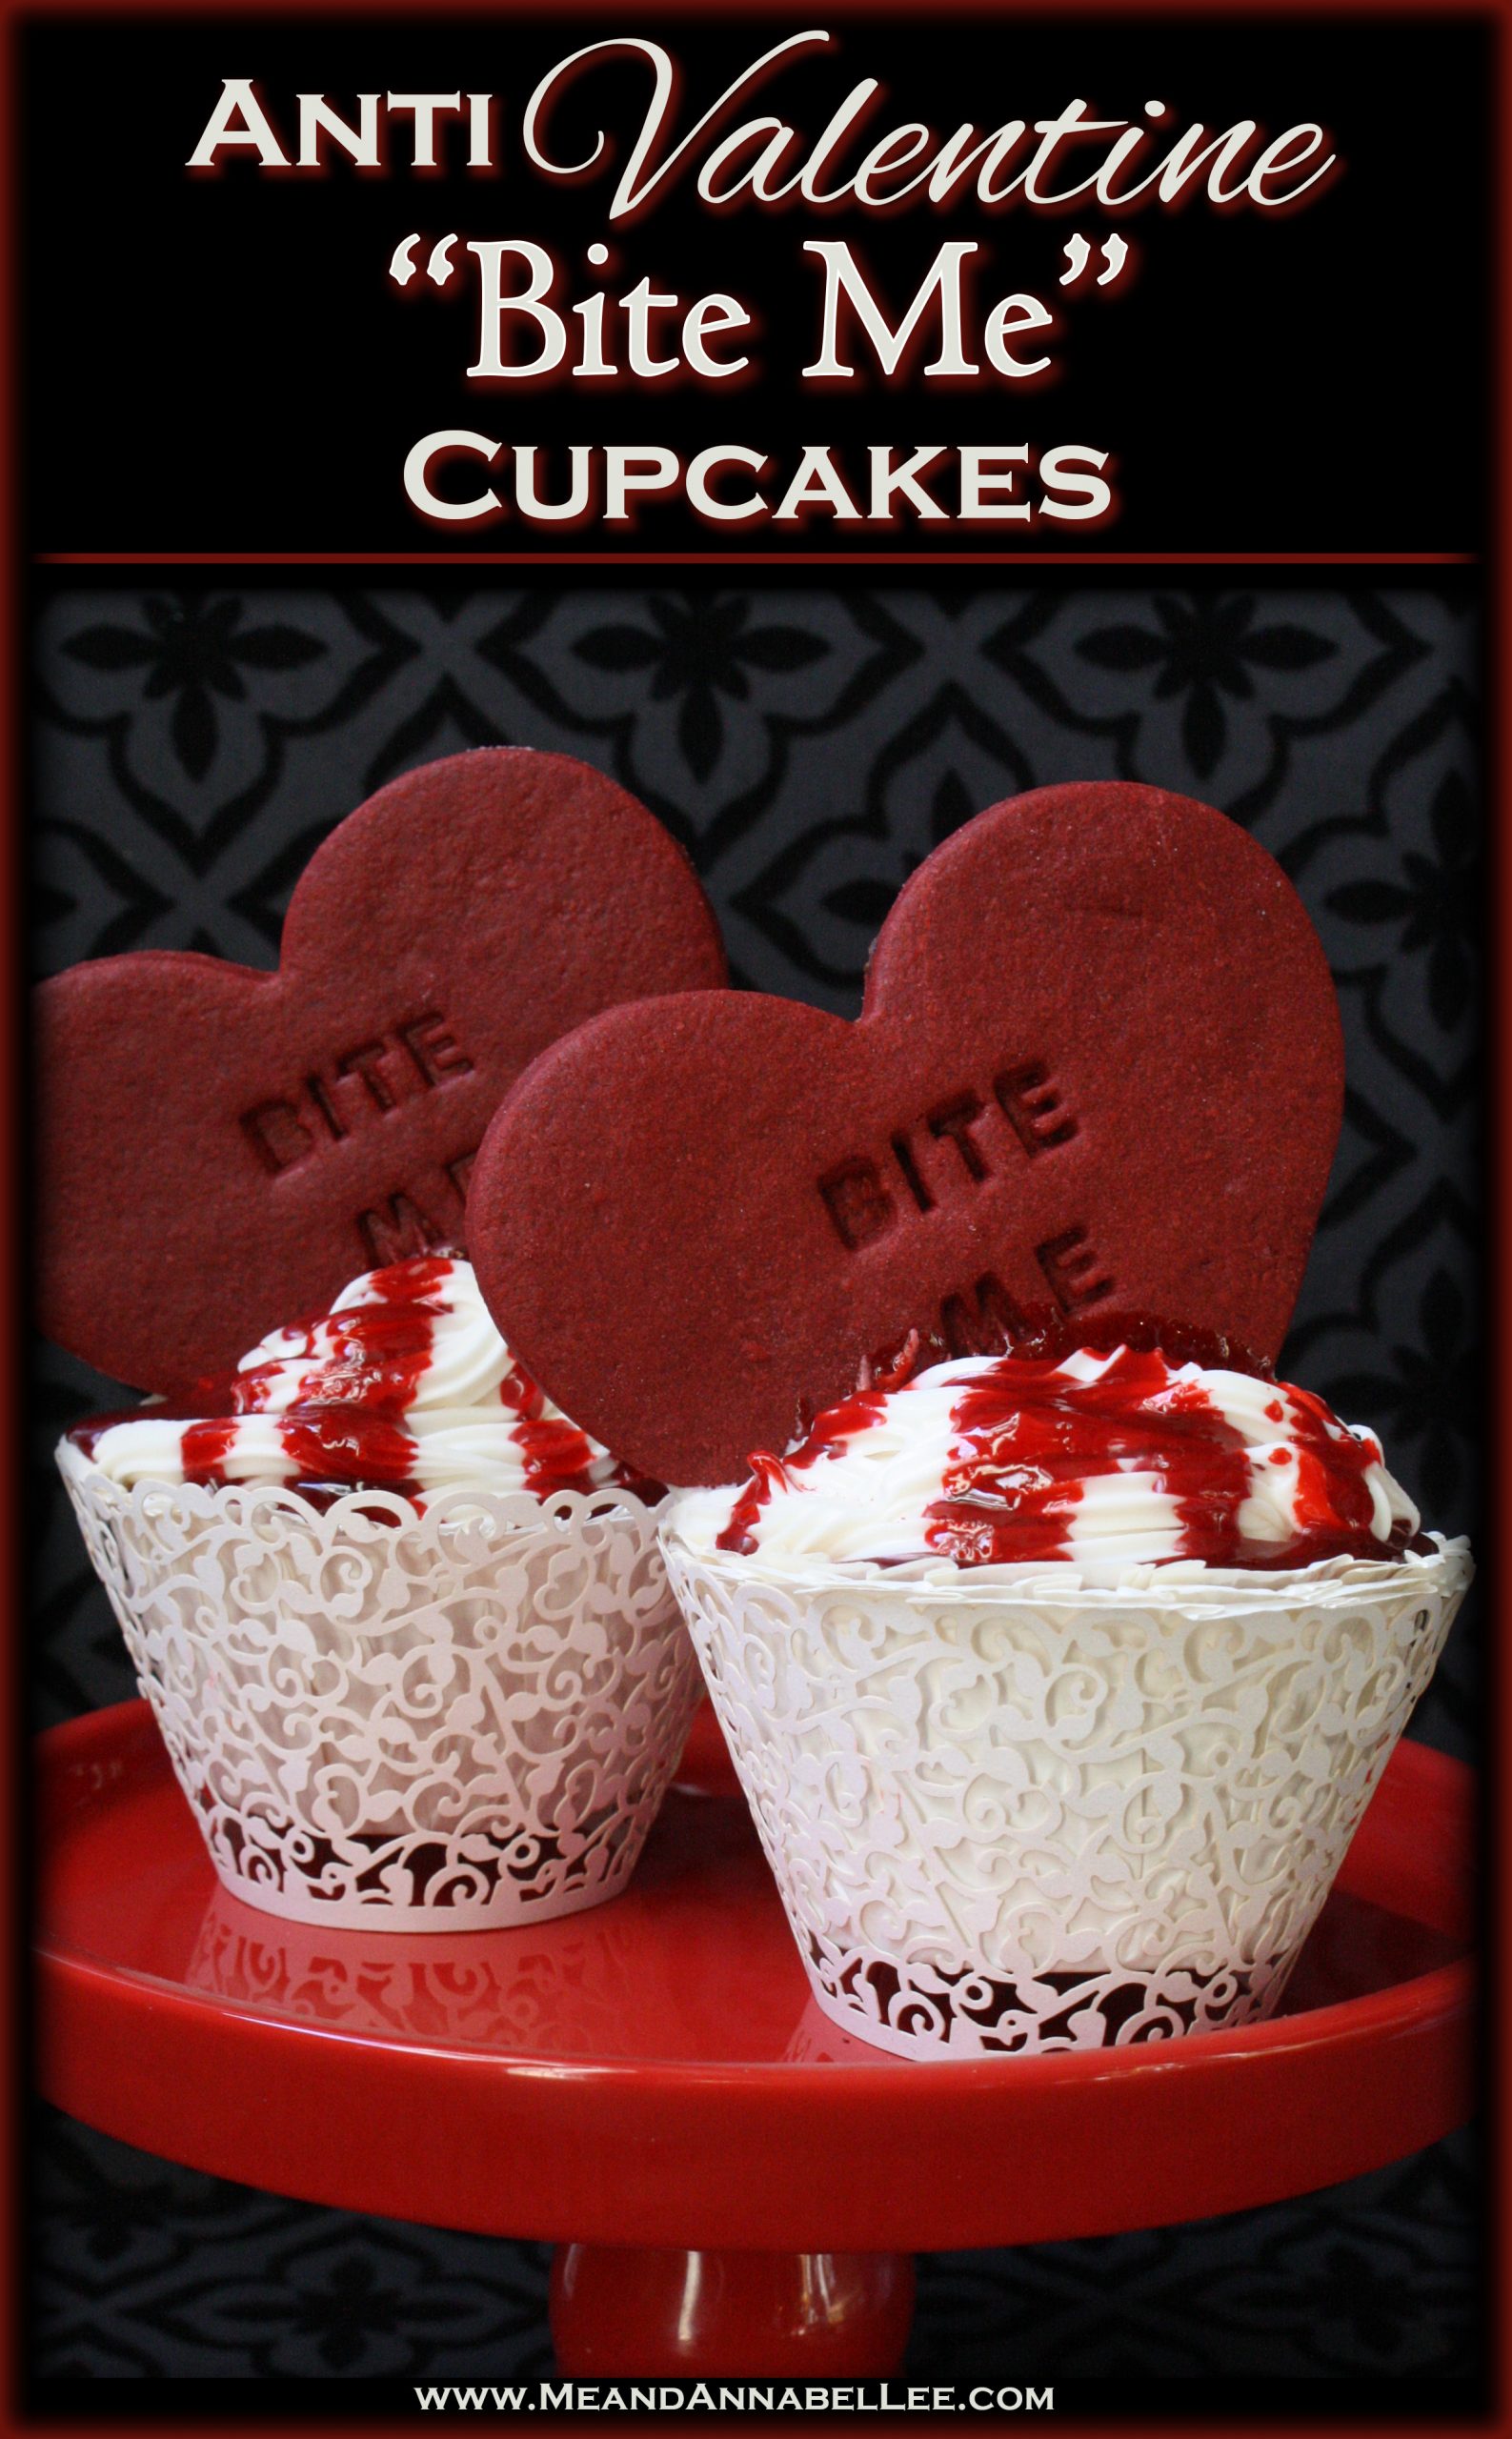 Conversation Heart Anti Valentine Cupcake and Cookie Topper…. Personalized Bite Me Red Velvet Sugar Cookies paired with Bloody Raspberry filled Cupcake | Horror food for your Gothic Valentine’s Day | Me and Annabel Lee